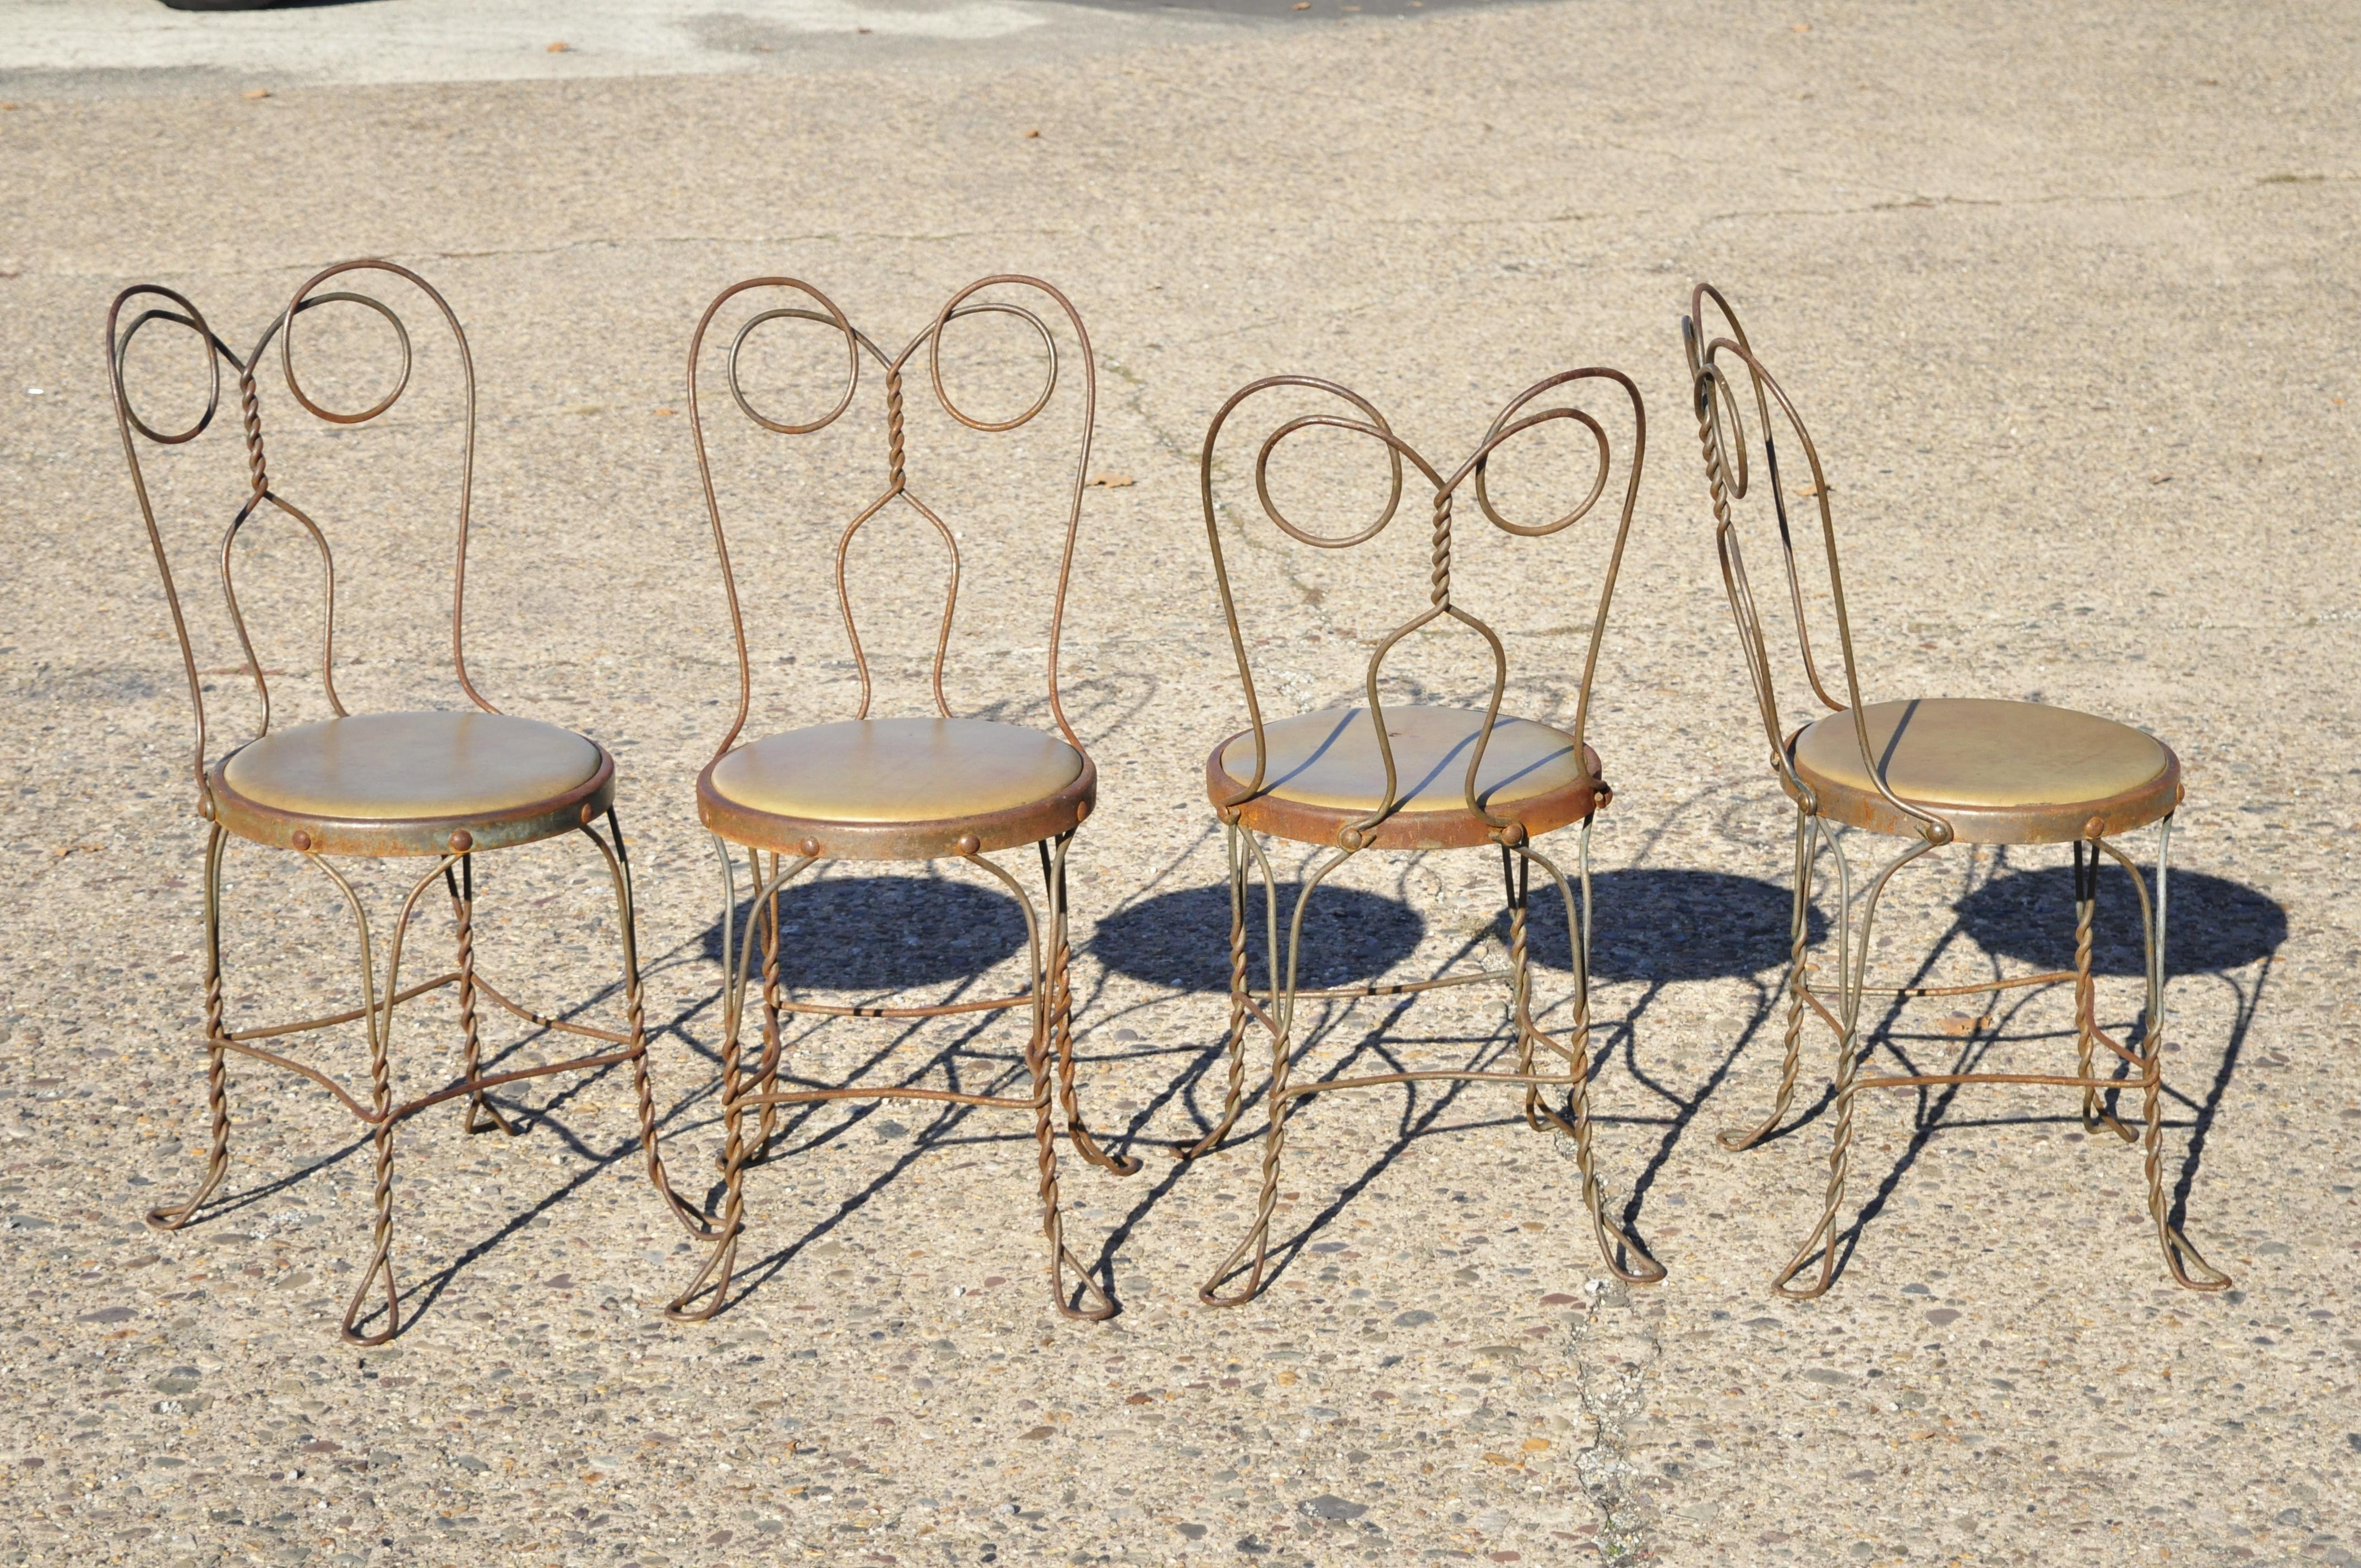 Antique twisted wrought iron ice cream parlor bistro dining chairs green distressed rusty finish - Set of 4. Item features round upholstered seats, wrought iron metal frames, distressed finish, very nice antique set, quality American craftsmanship,